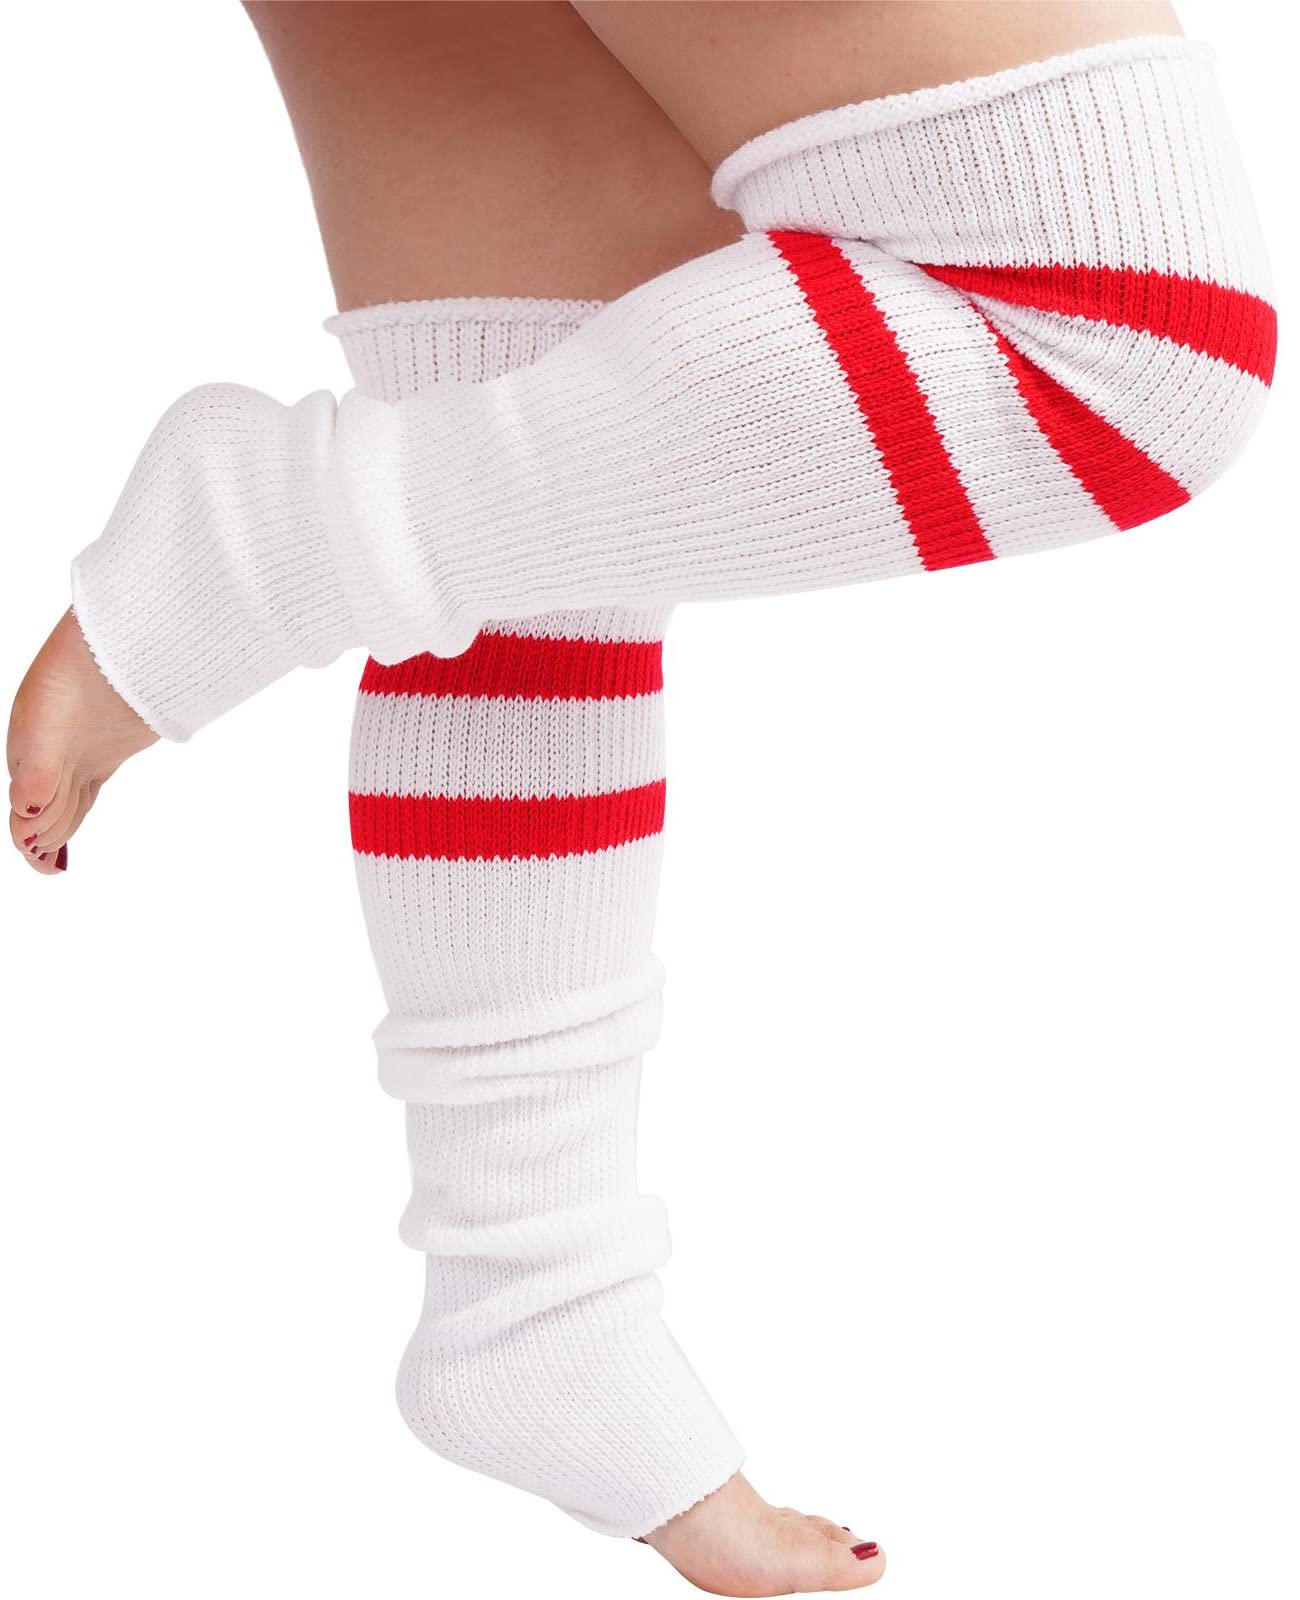 Thigh High Leg Warmers for Women - with Silicon, Medium size